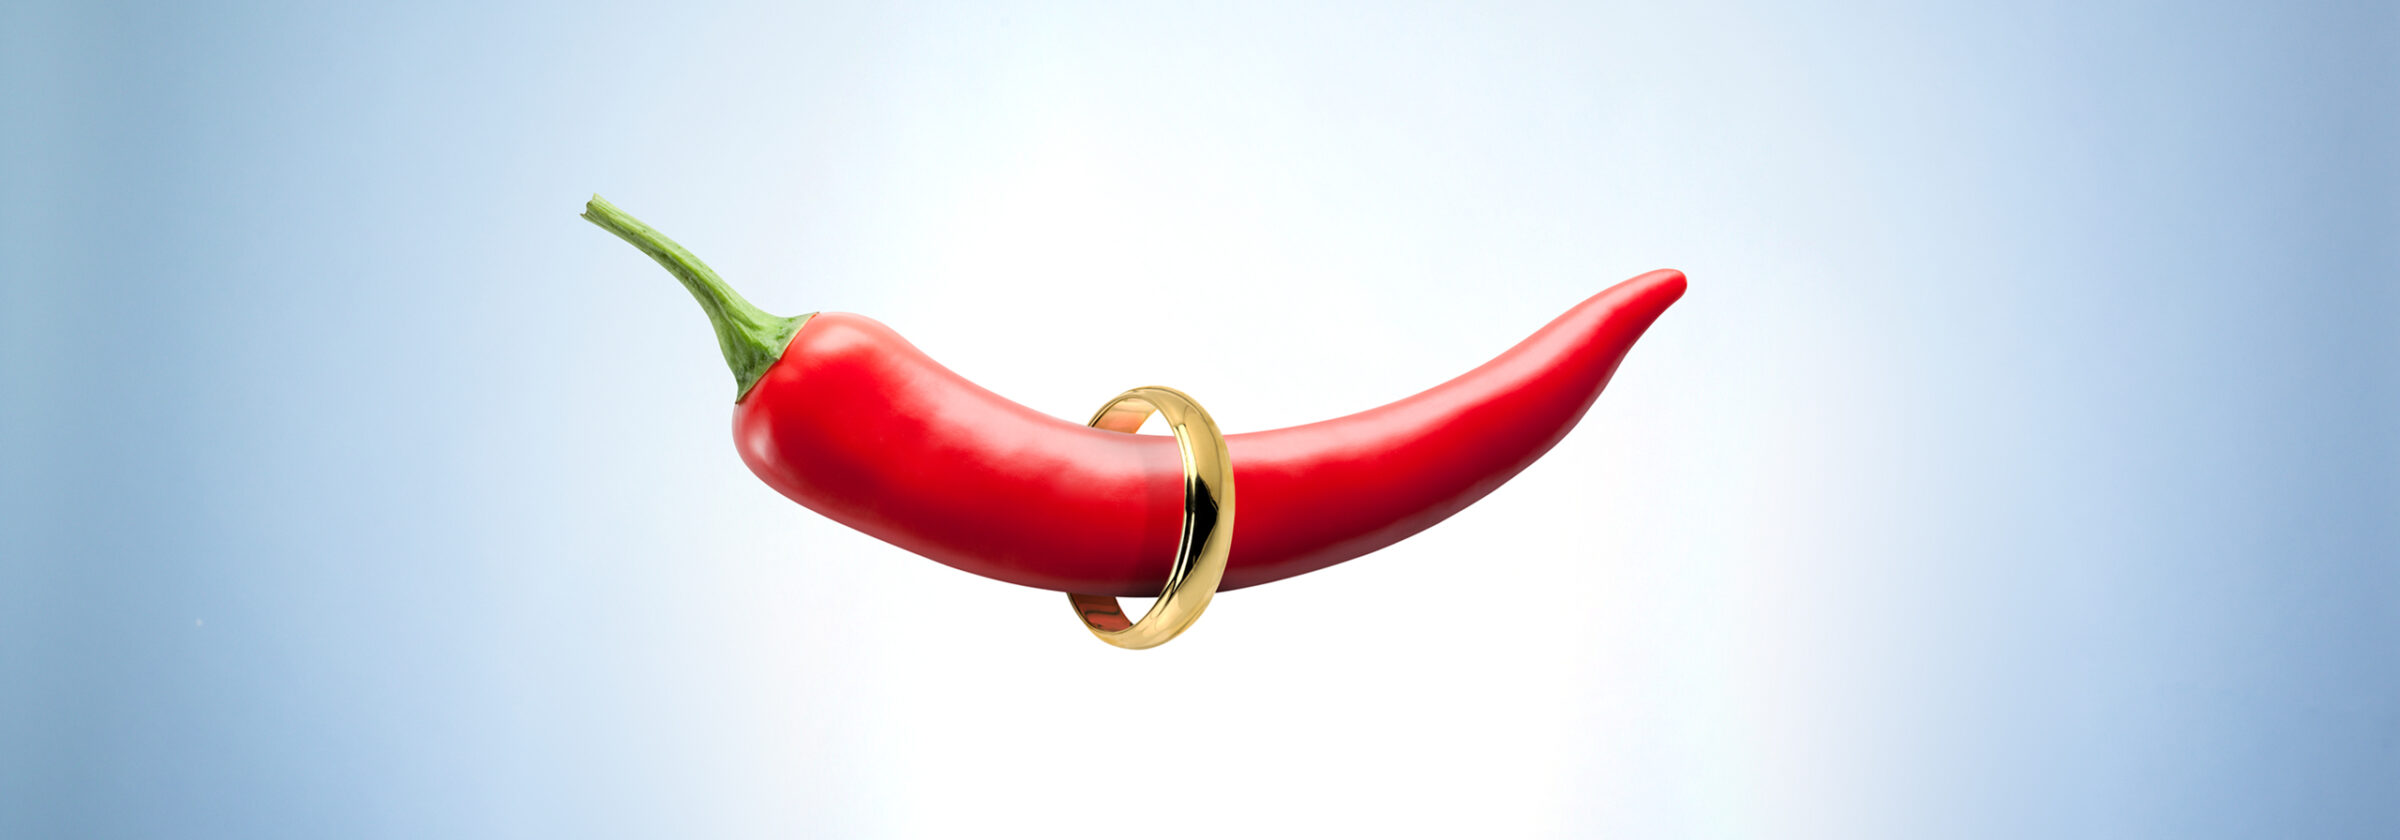 brand category concept image of a chili and a ring for aXichem by Adentity